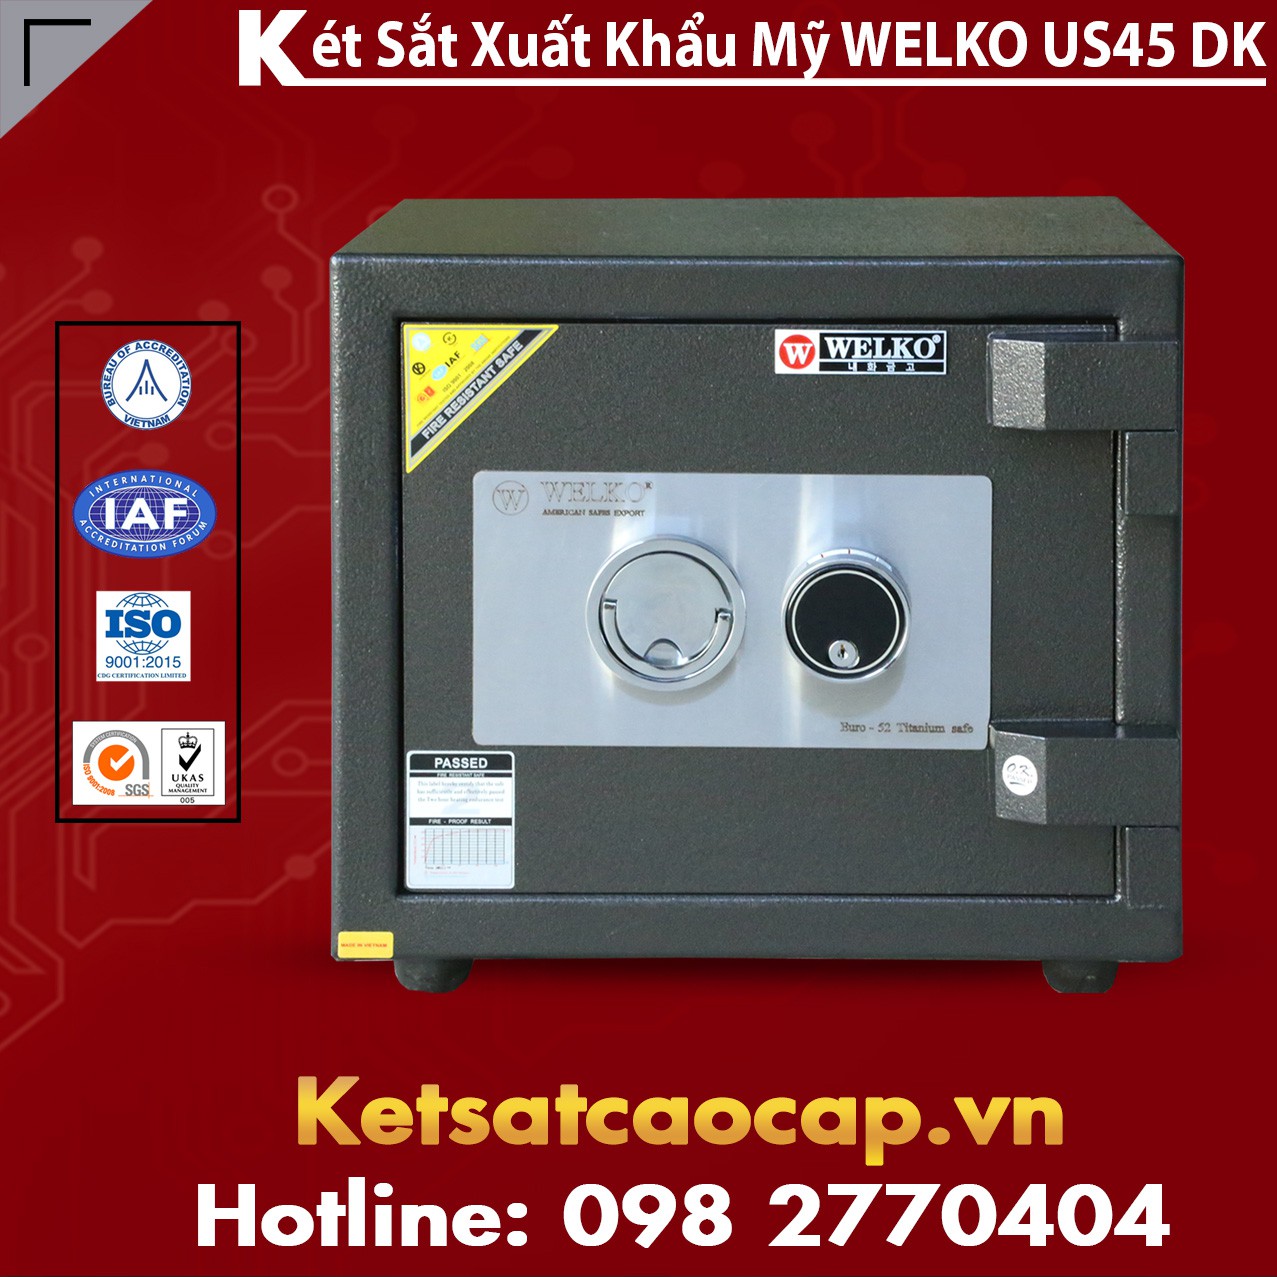 hình ảnh sản phẩm Depository Safe Suppliers and Exporters best seller